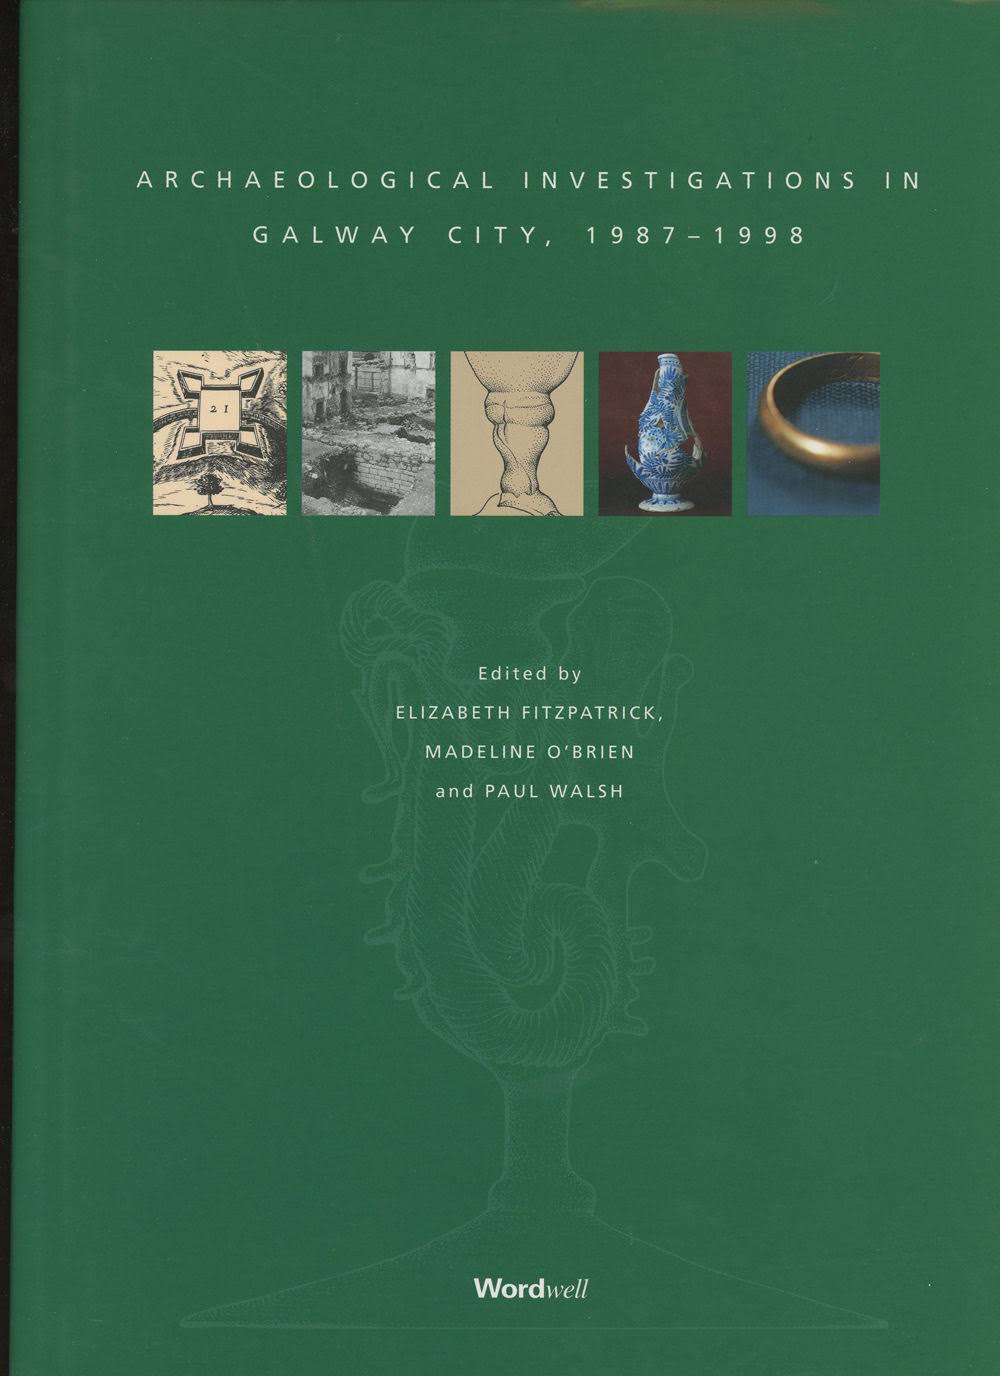 Archaeological Investigations in Galway City, 1987-1998 [Book]